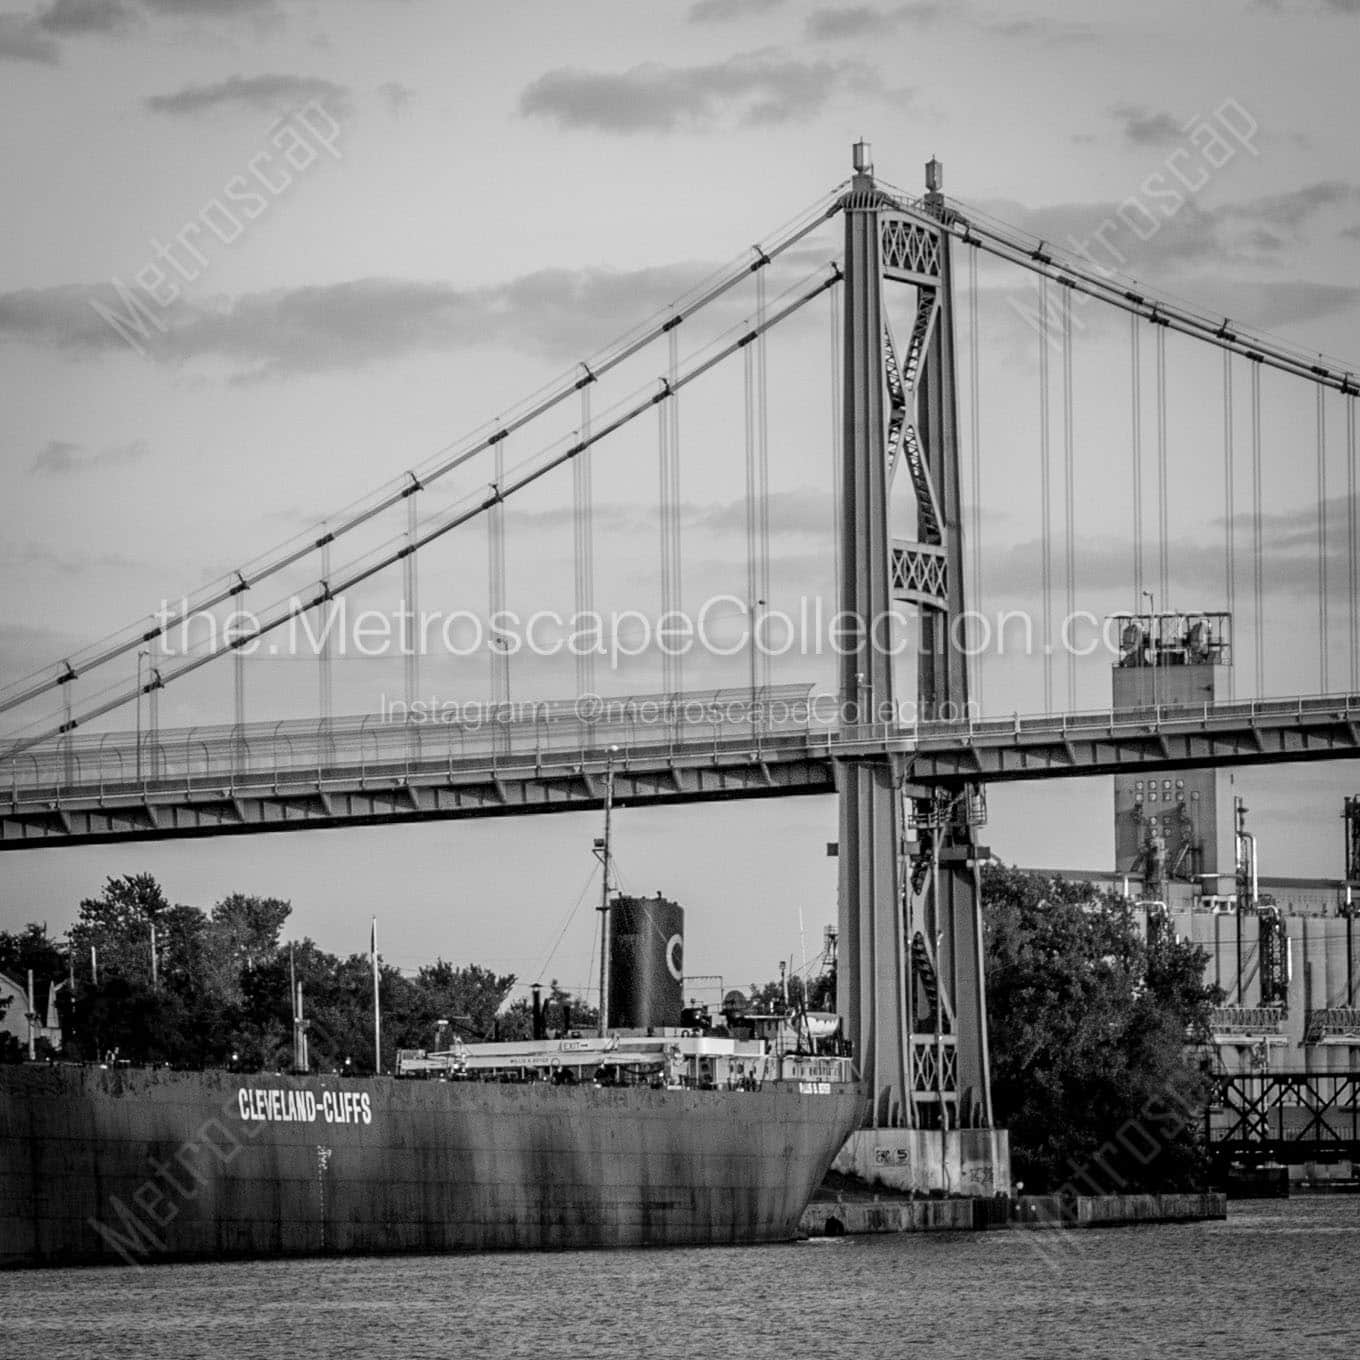 cleveland cliffs barge maumee river Black & White Office Art